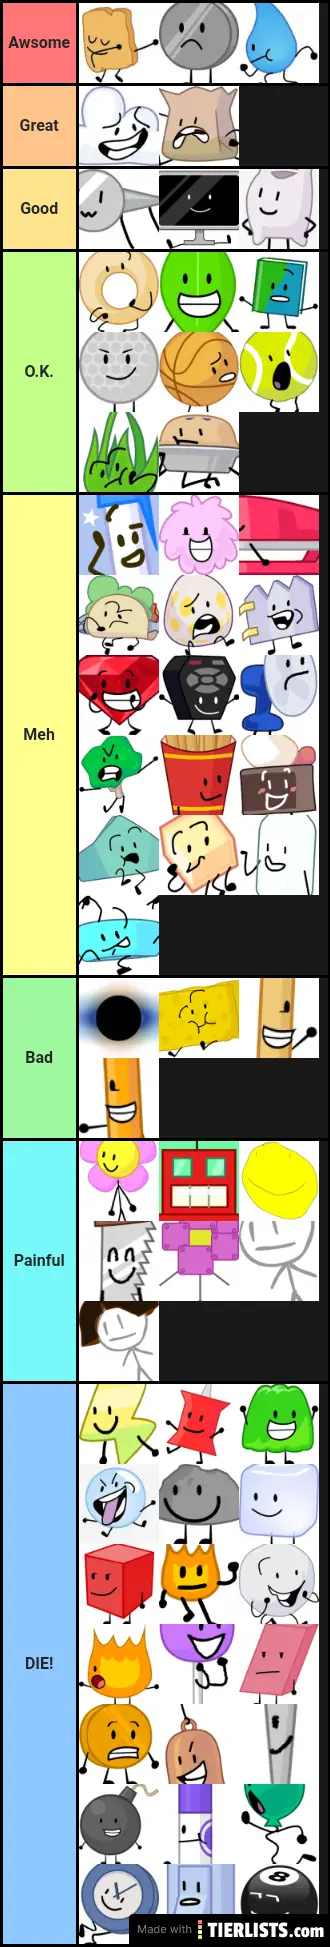 DIE to Awsome bfb characters